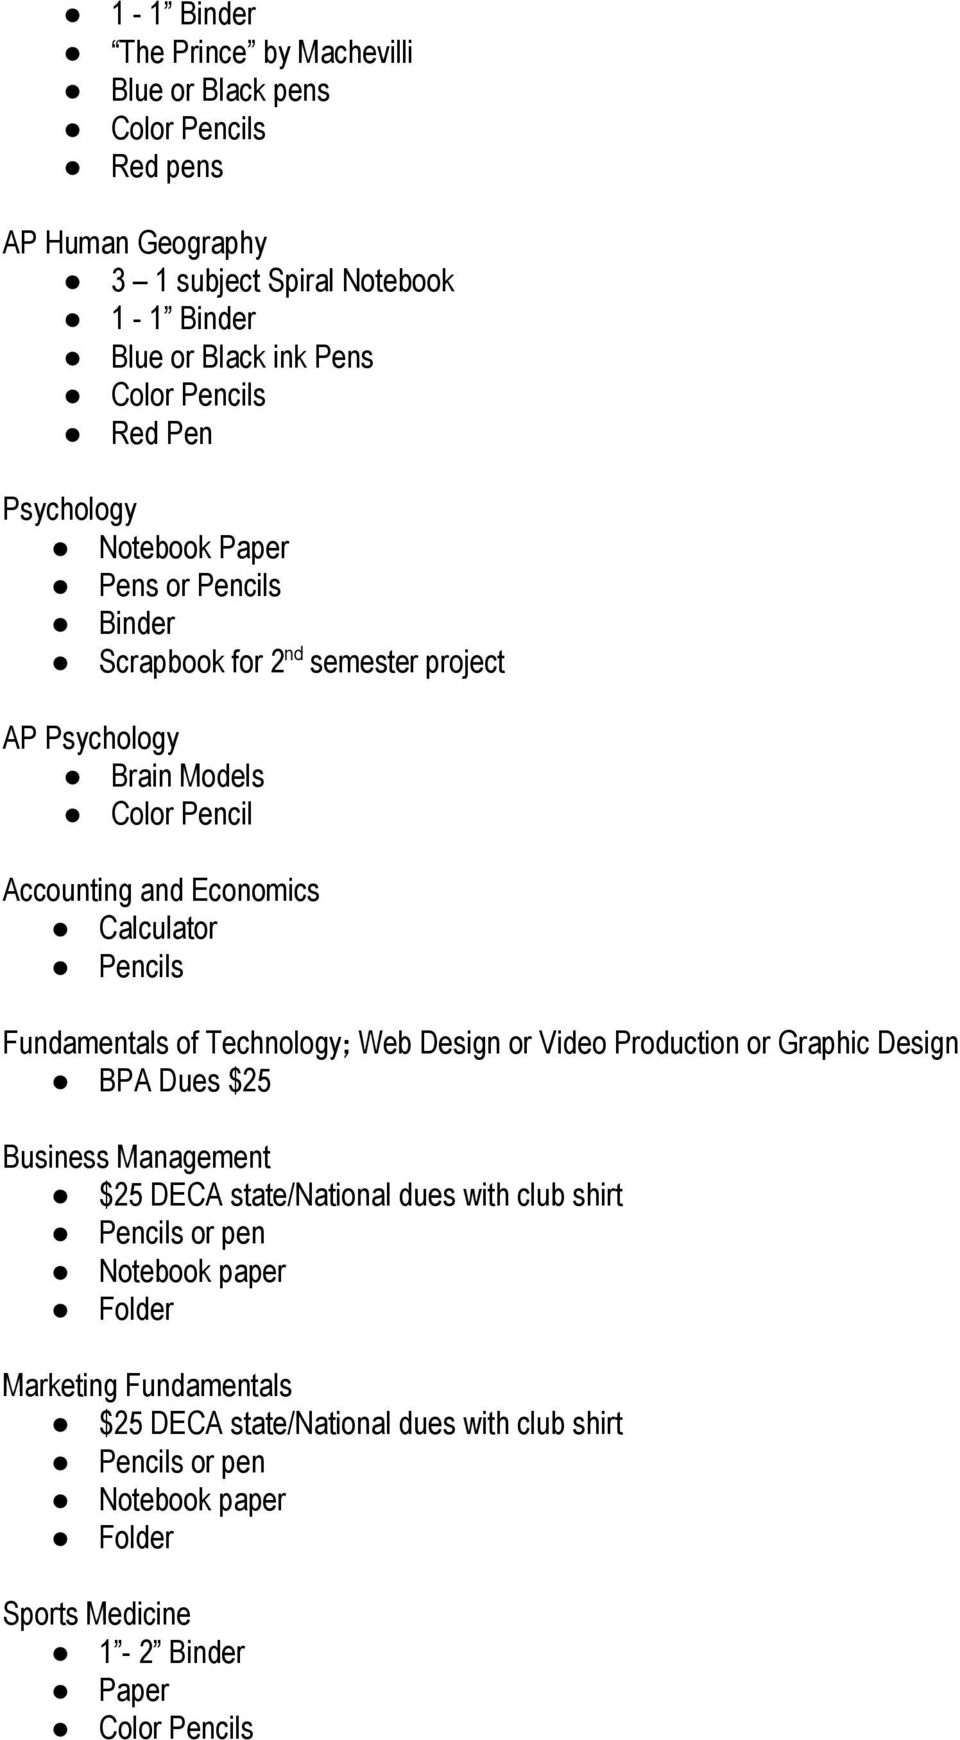 Pencils Fundamentals of Technology; Web Design or Video Production or Graphic Design BPA Dues $25 Business Management $25 DECA state/national dues with club shirt Pencils or